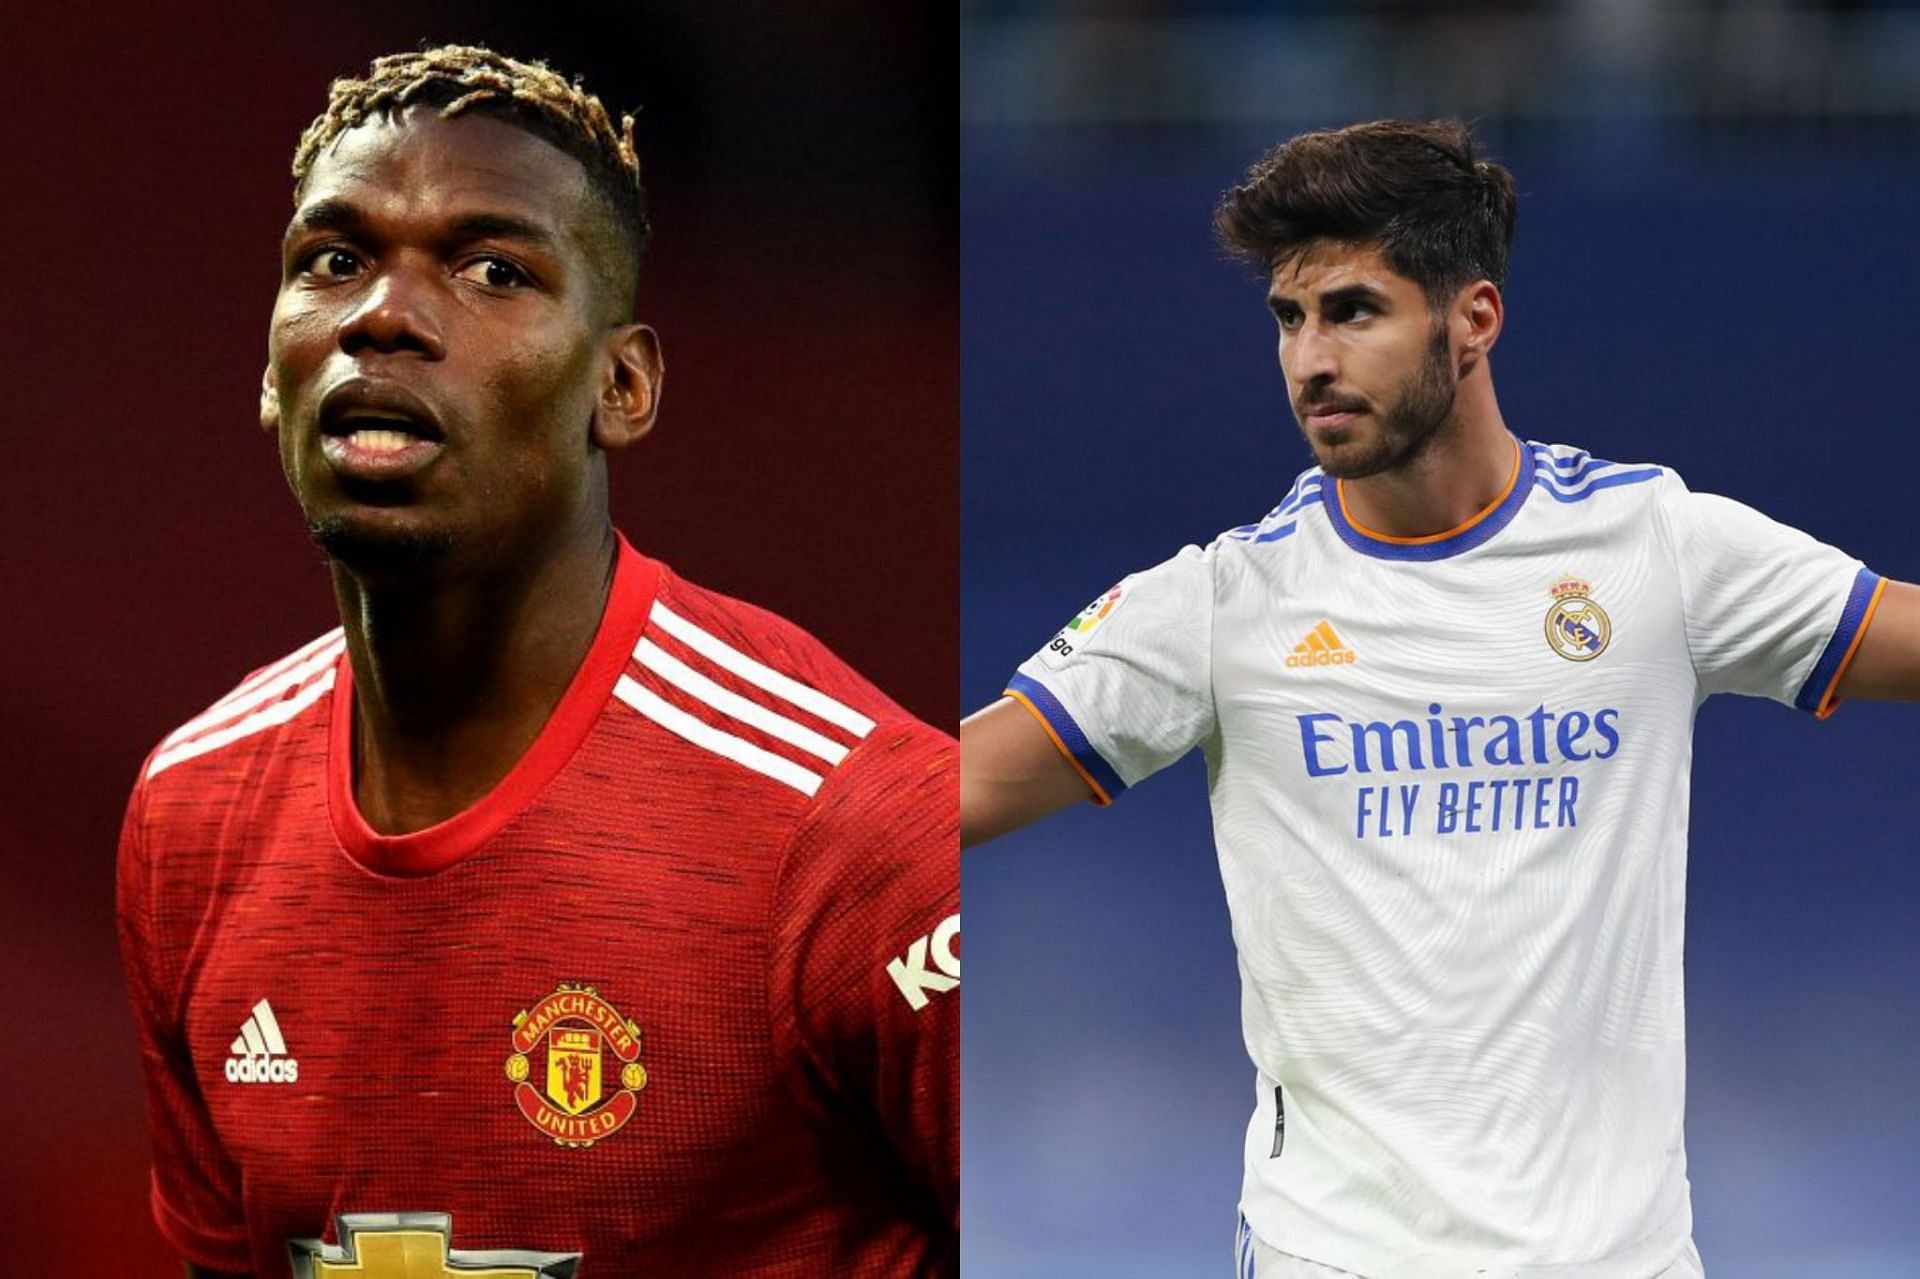 Paul Pogba (left) and Marco Asensio (right) have been quite inconsistent with their performances.